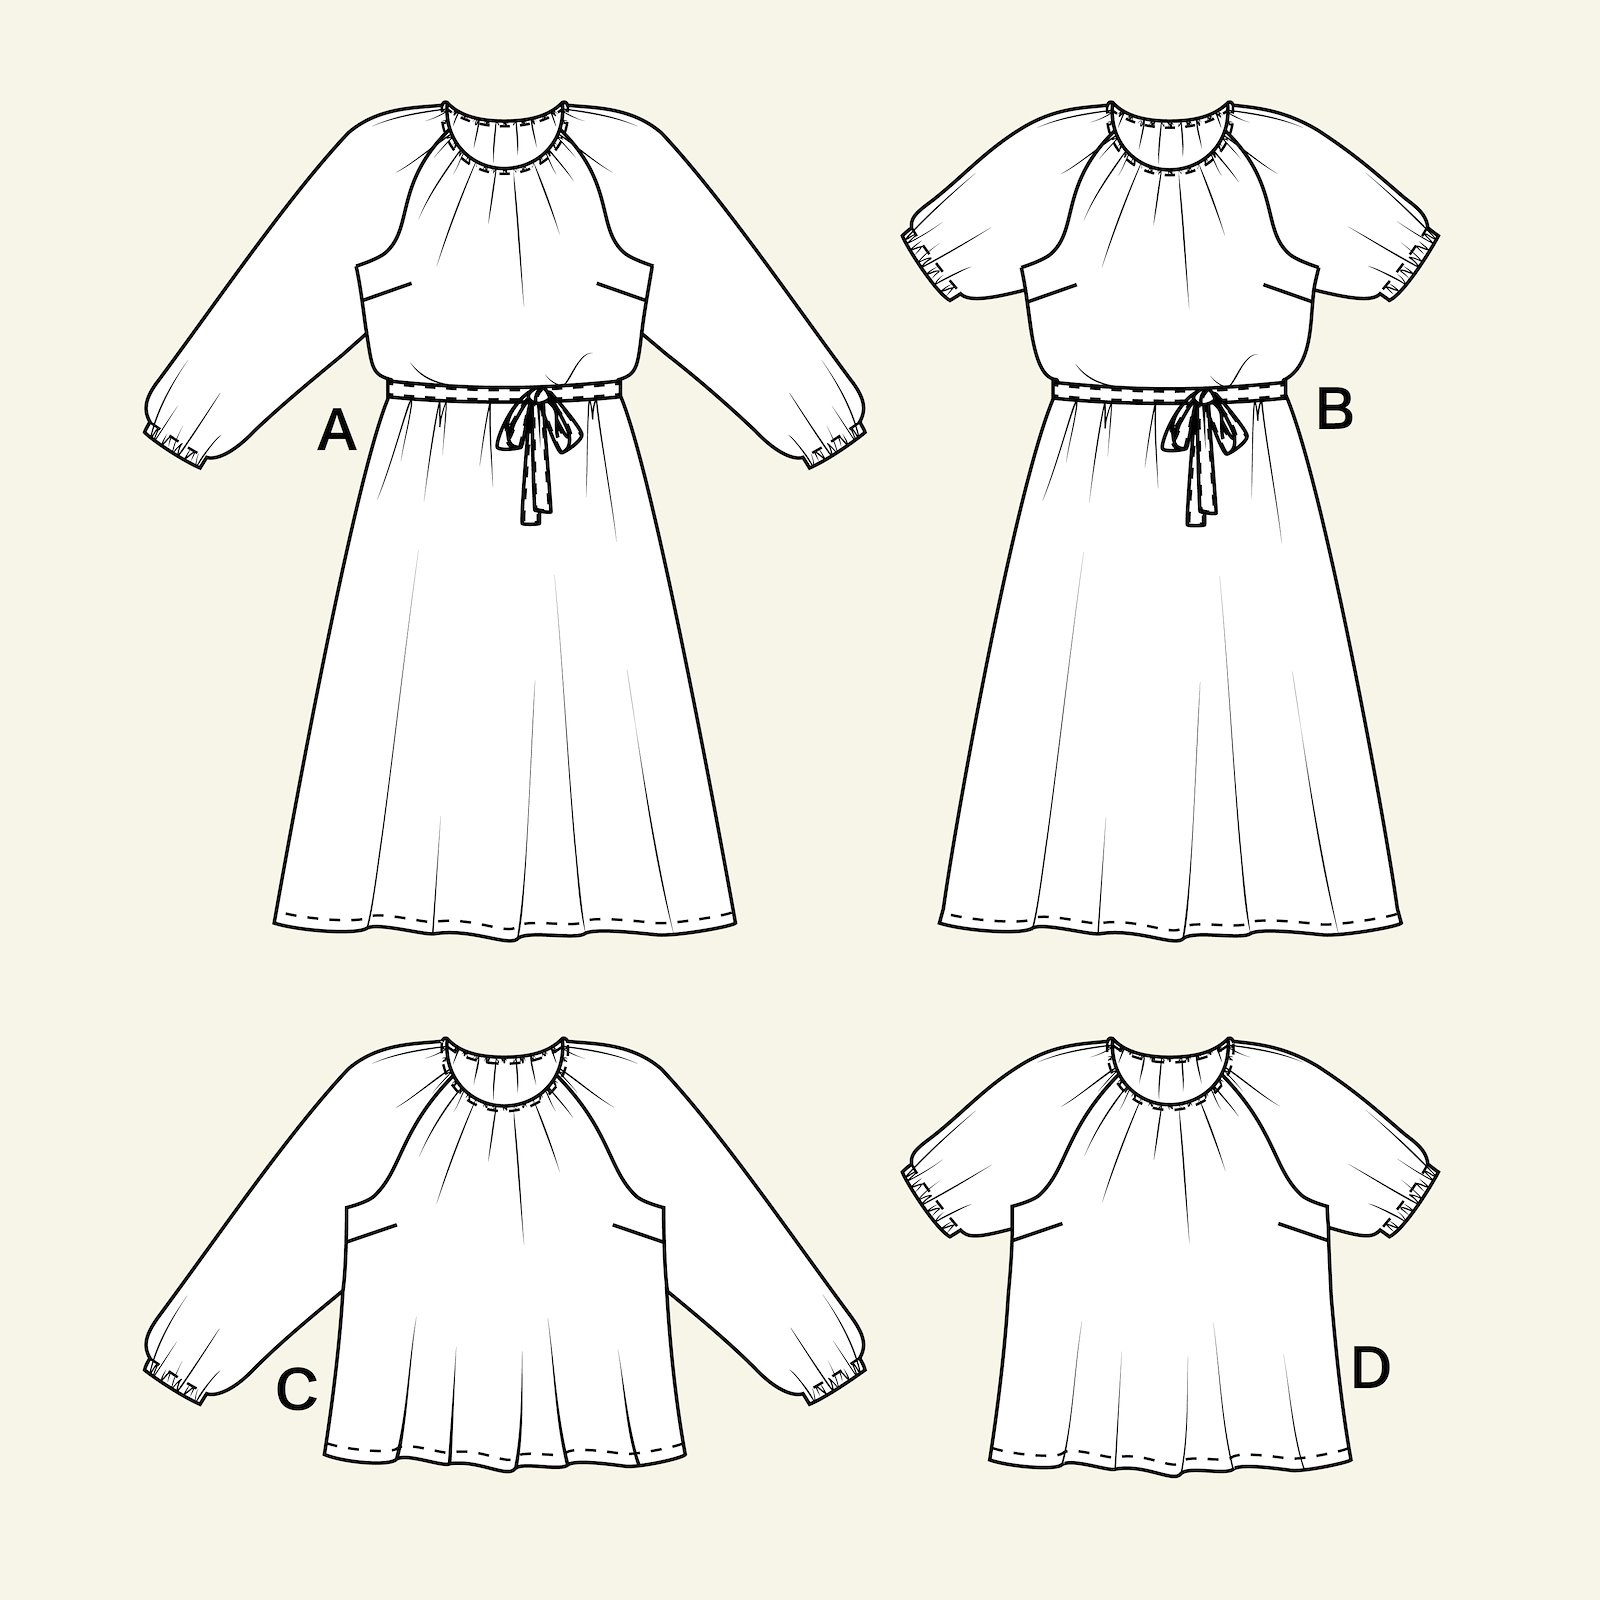 Dress with belt and blouse, 34/6 p23167000_p23167001_p23167002_p23167003_p23167004_pack_b.png